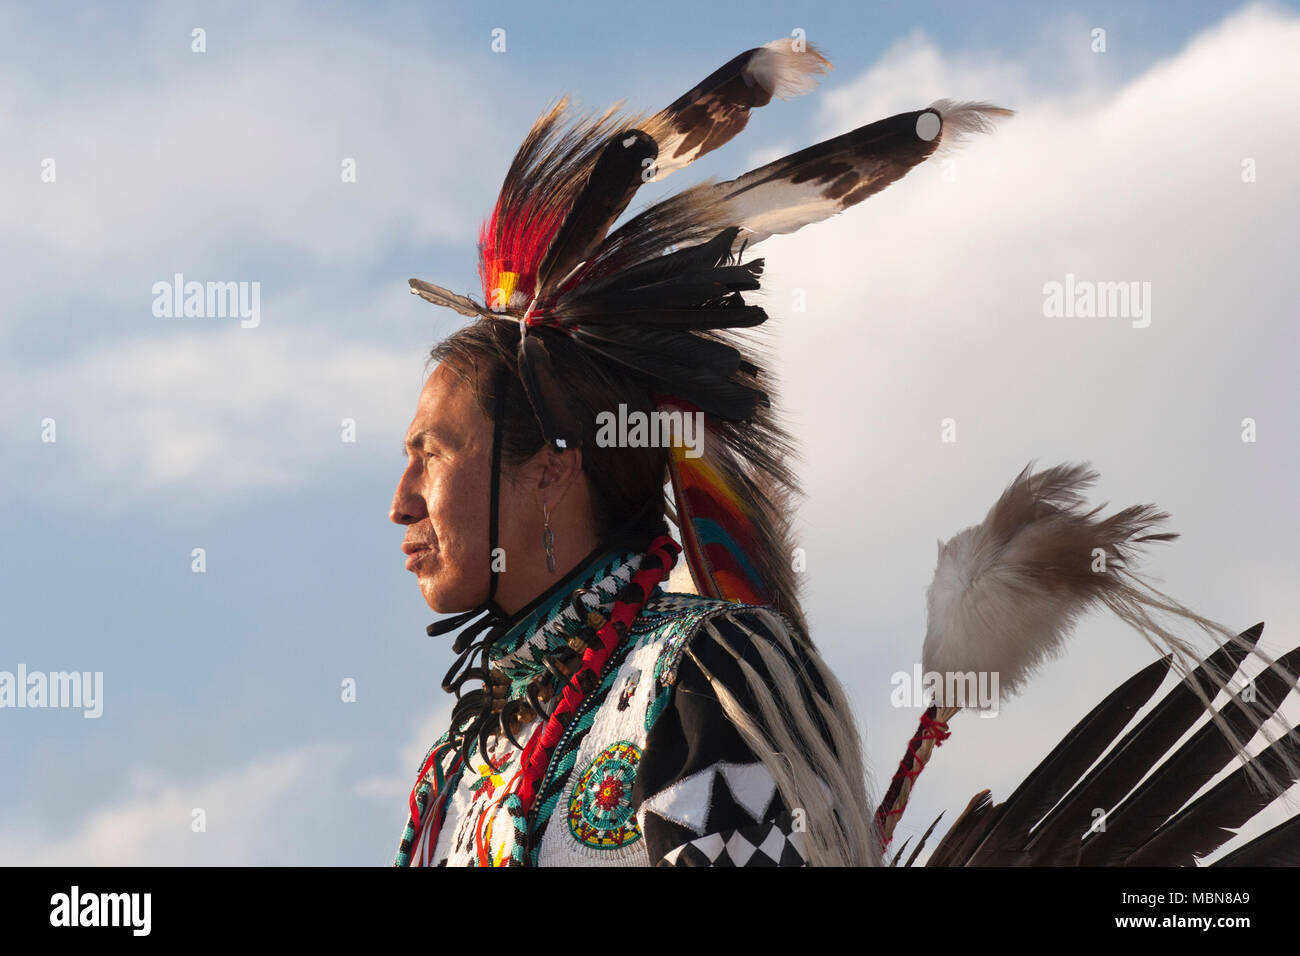 Native American man wearing costume traditionnel Cheyenne Banque D'Images